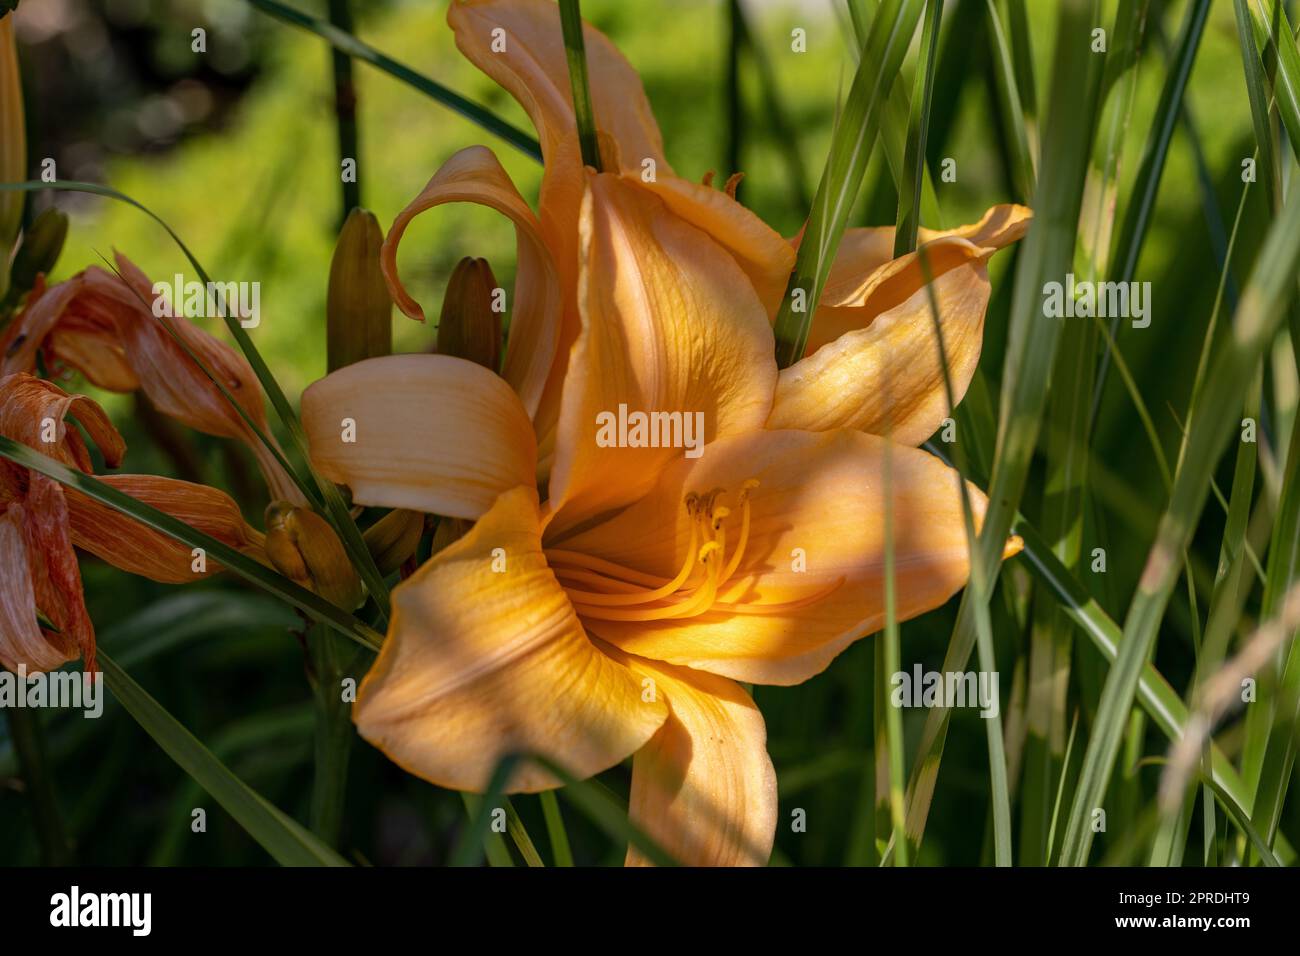 orange lily flower with delicate petals in garden Stock Photo